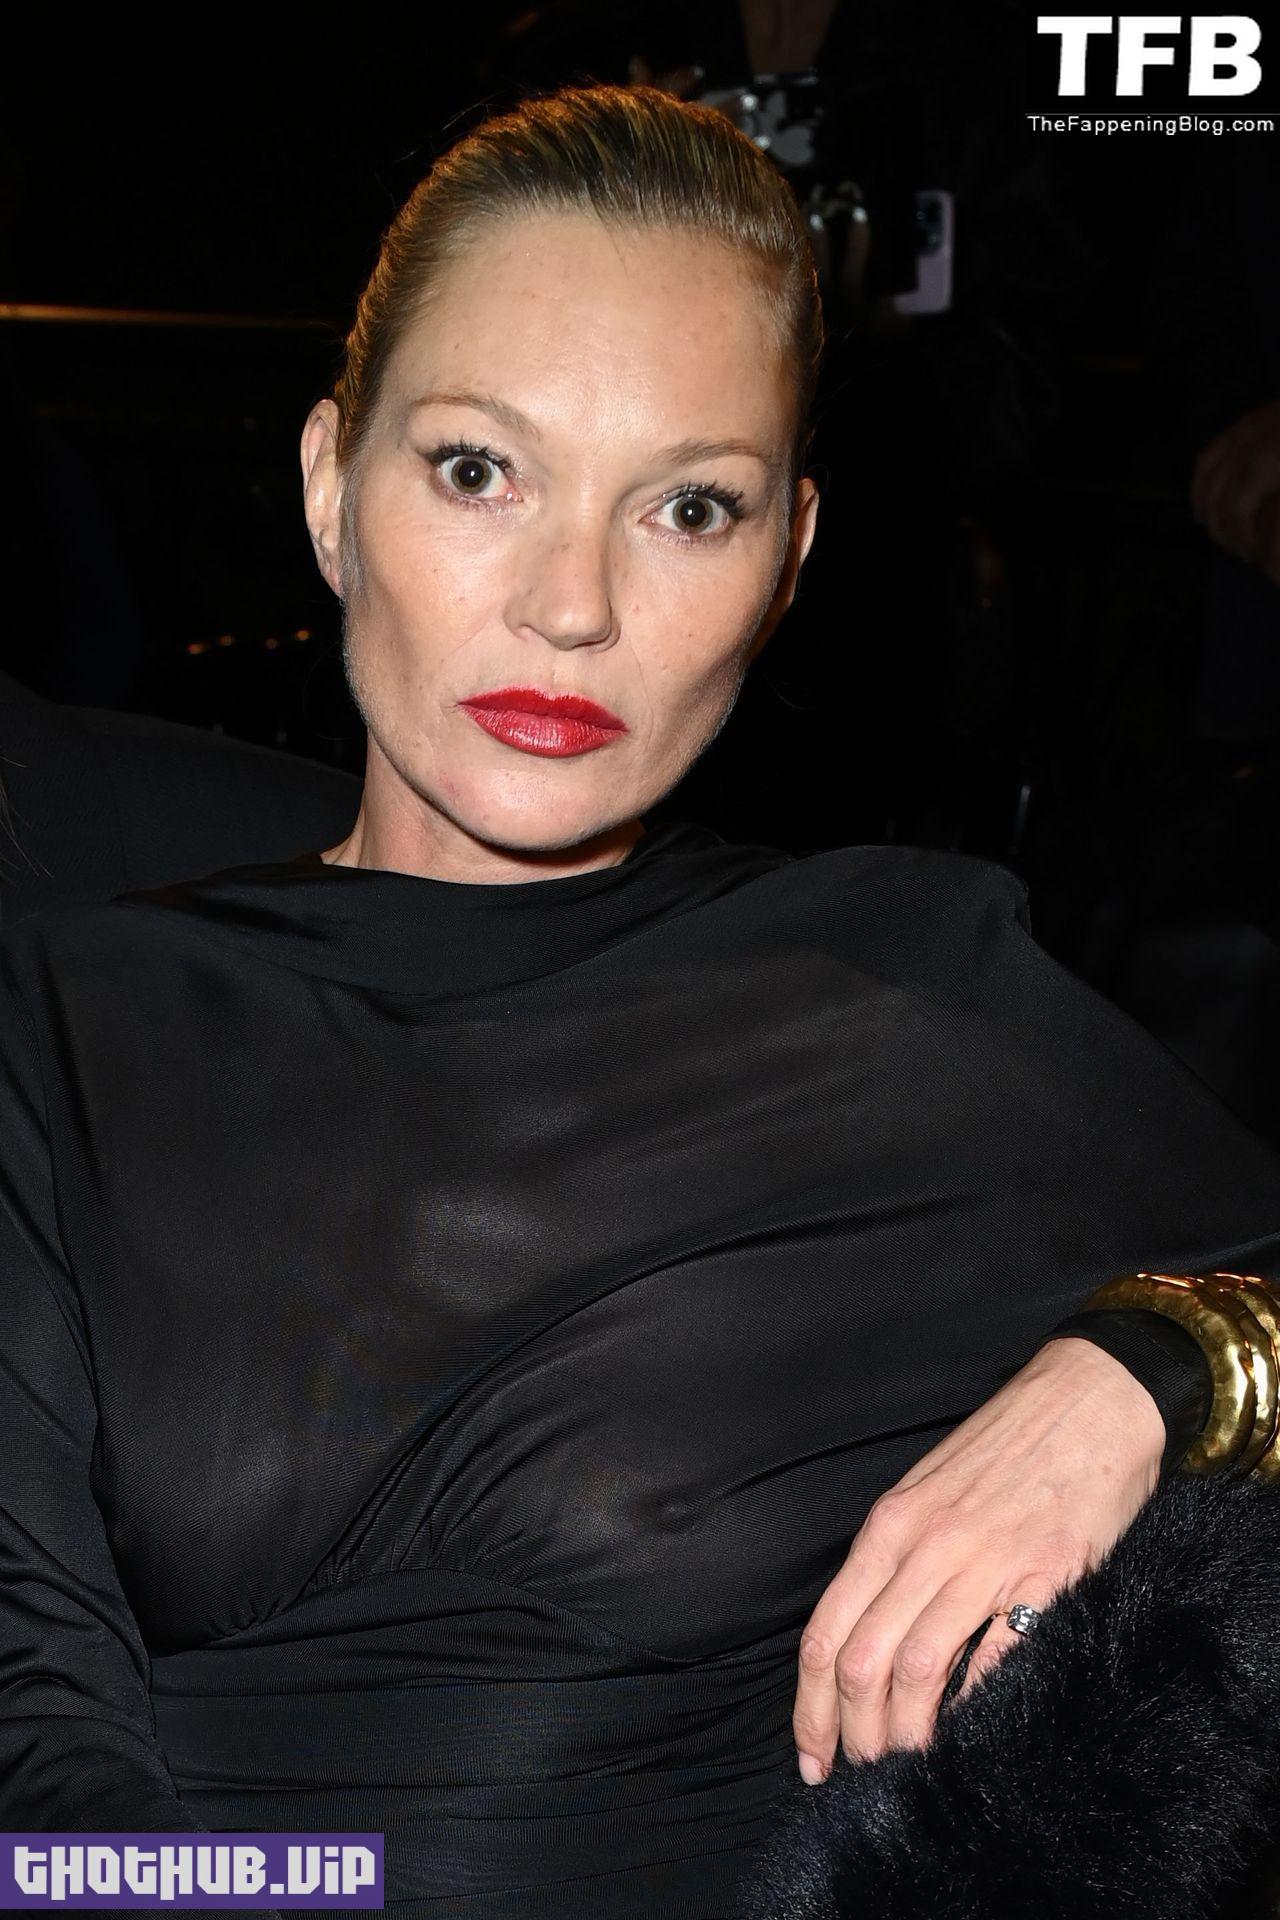 Kate Moss Nude see through The Fappening Blog 83